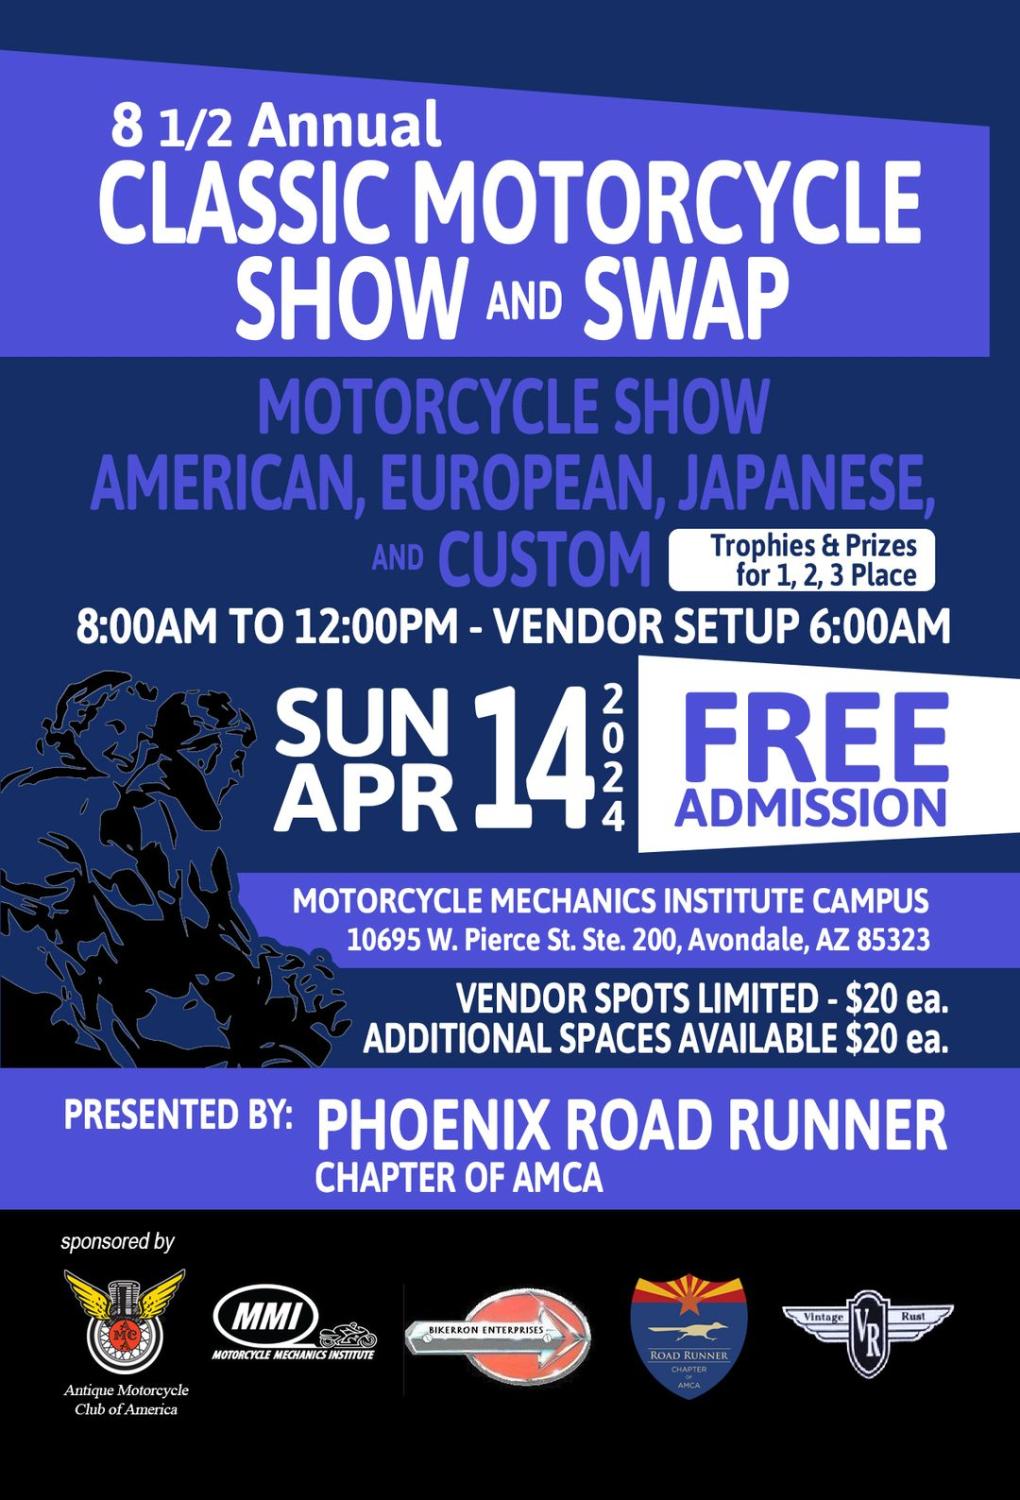 8 1/2 Annual Classic Motorcycle Show and Swap